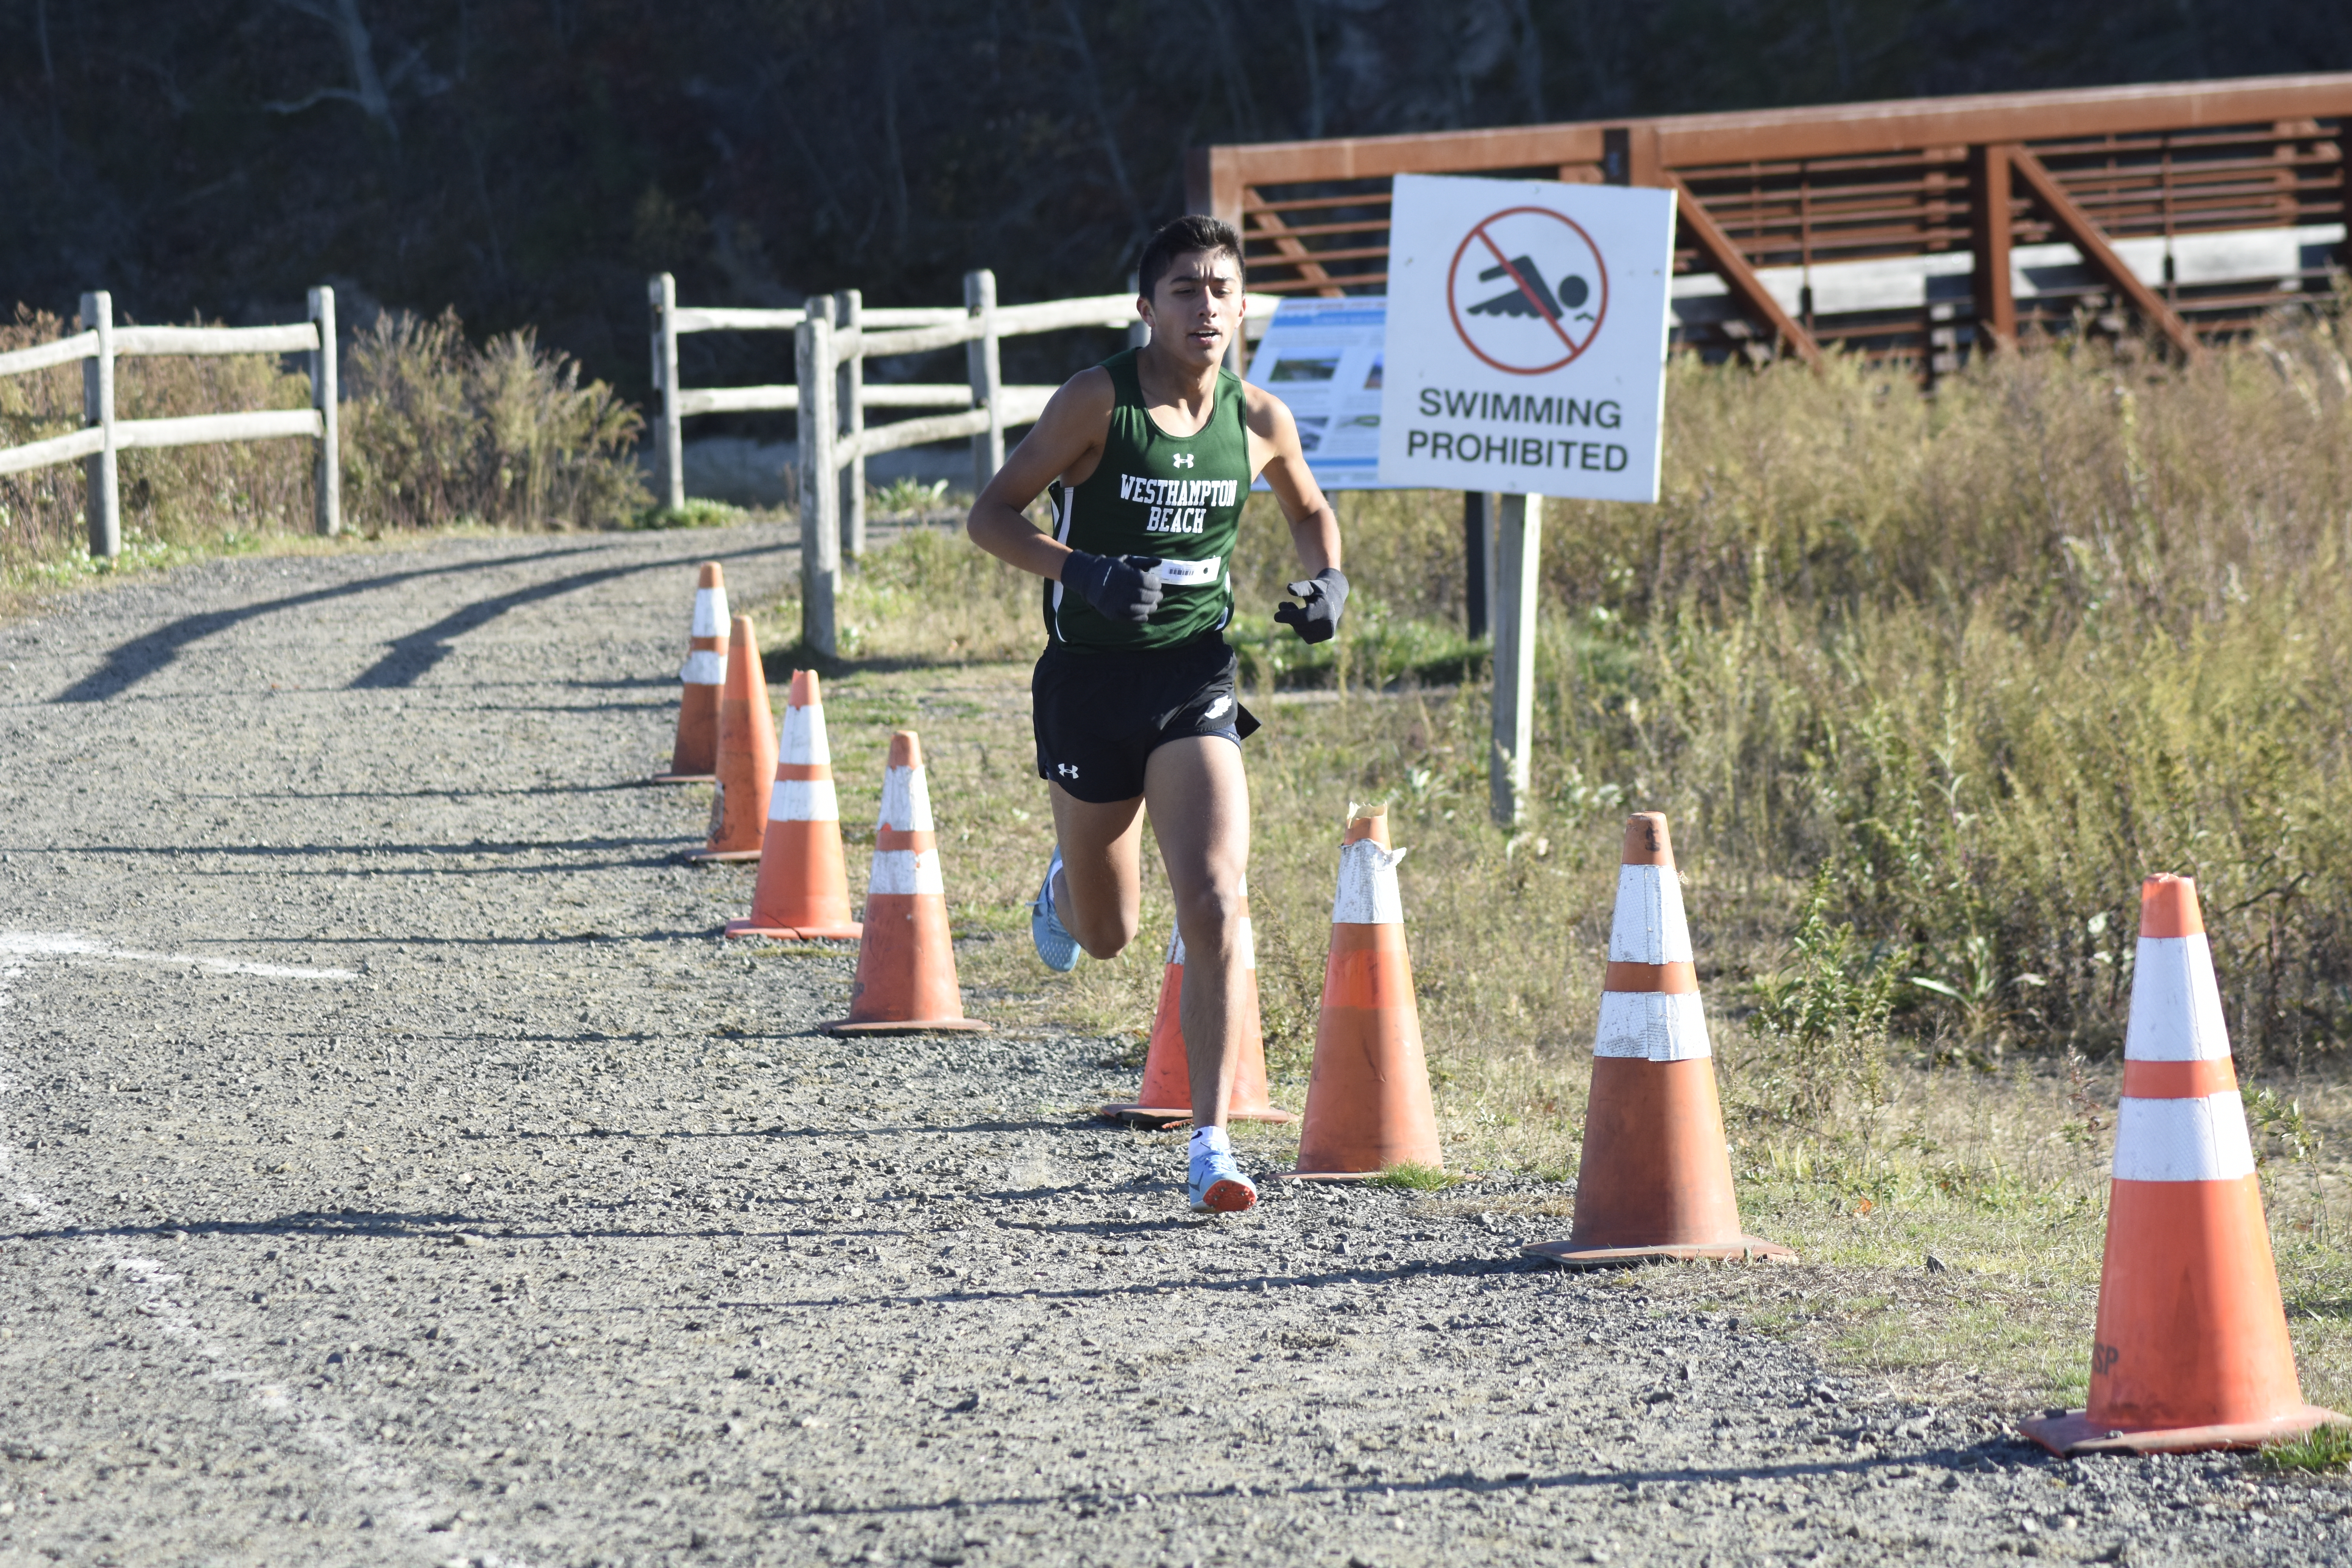 Westhampton Beach senior Ermel Bautista shaved 20 seconds off his time from a week ago at Divisions.